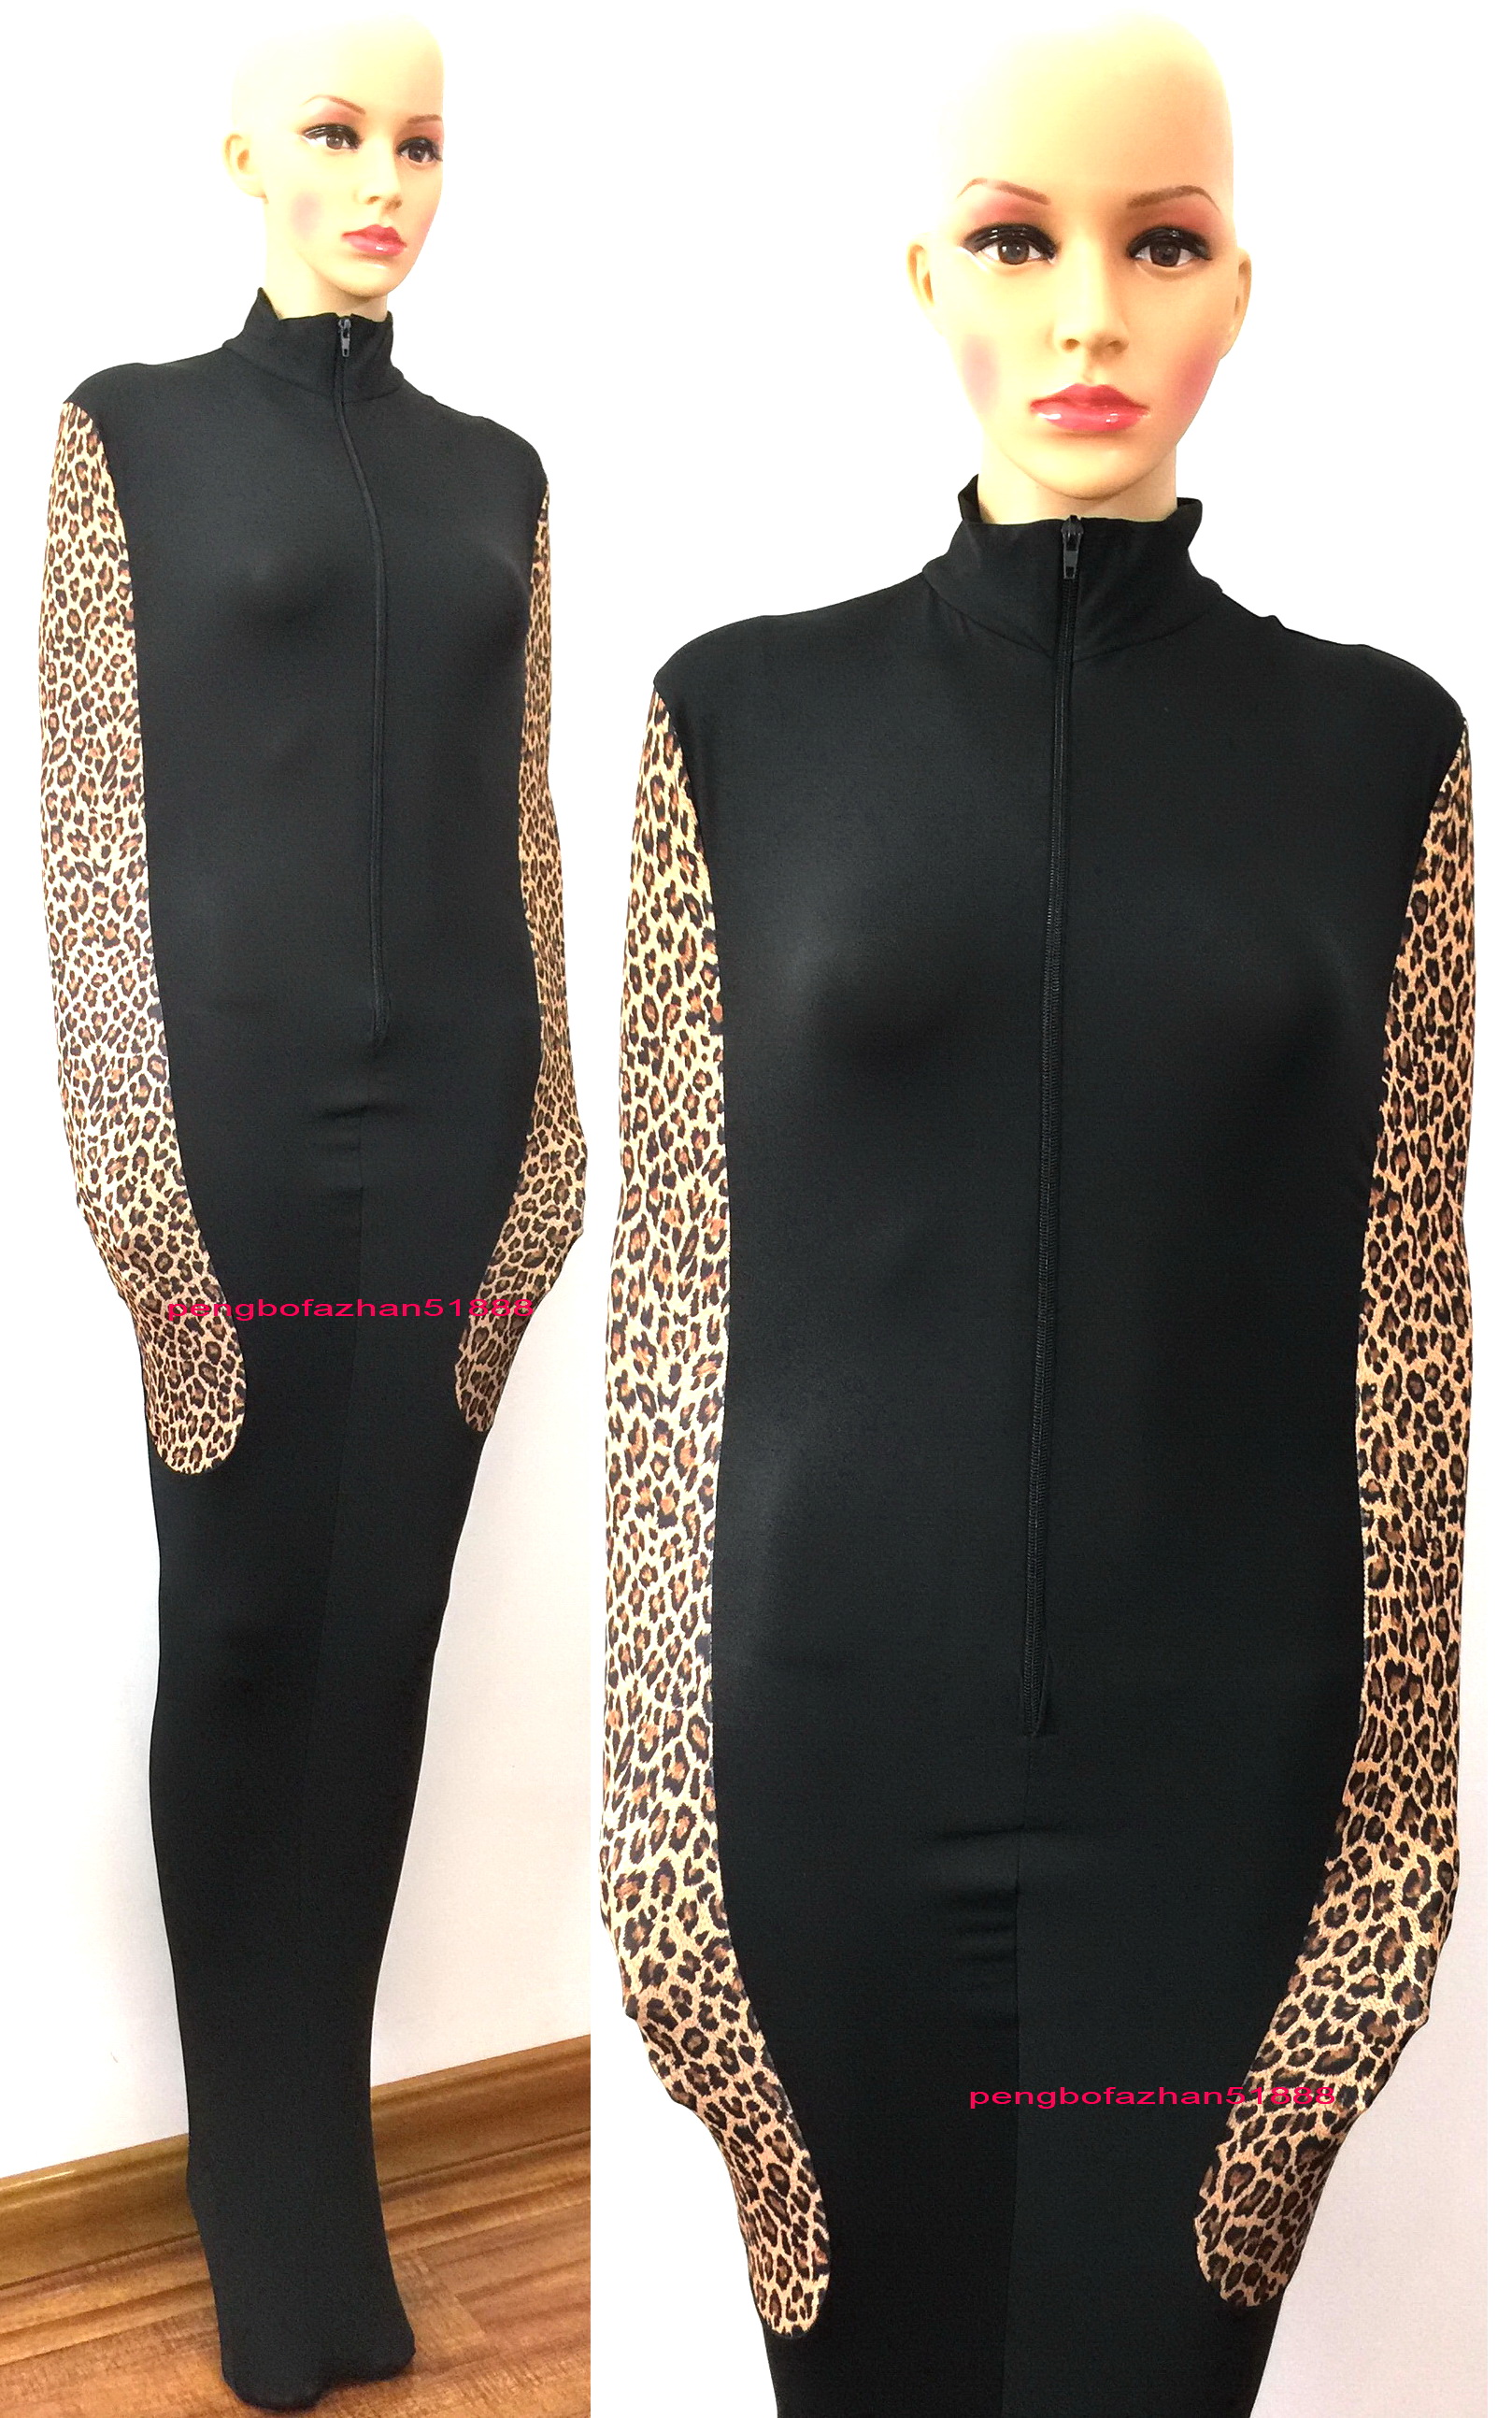 

Sexy Women Sleeping Bag Body Bags Catsuit Costume Black/Leopard Pattern Lycra Spandex Mummy Suit Costumes With internal Arm Sleeves Unisex Sleepsacks Outfit P302